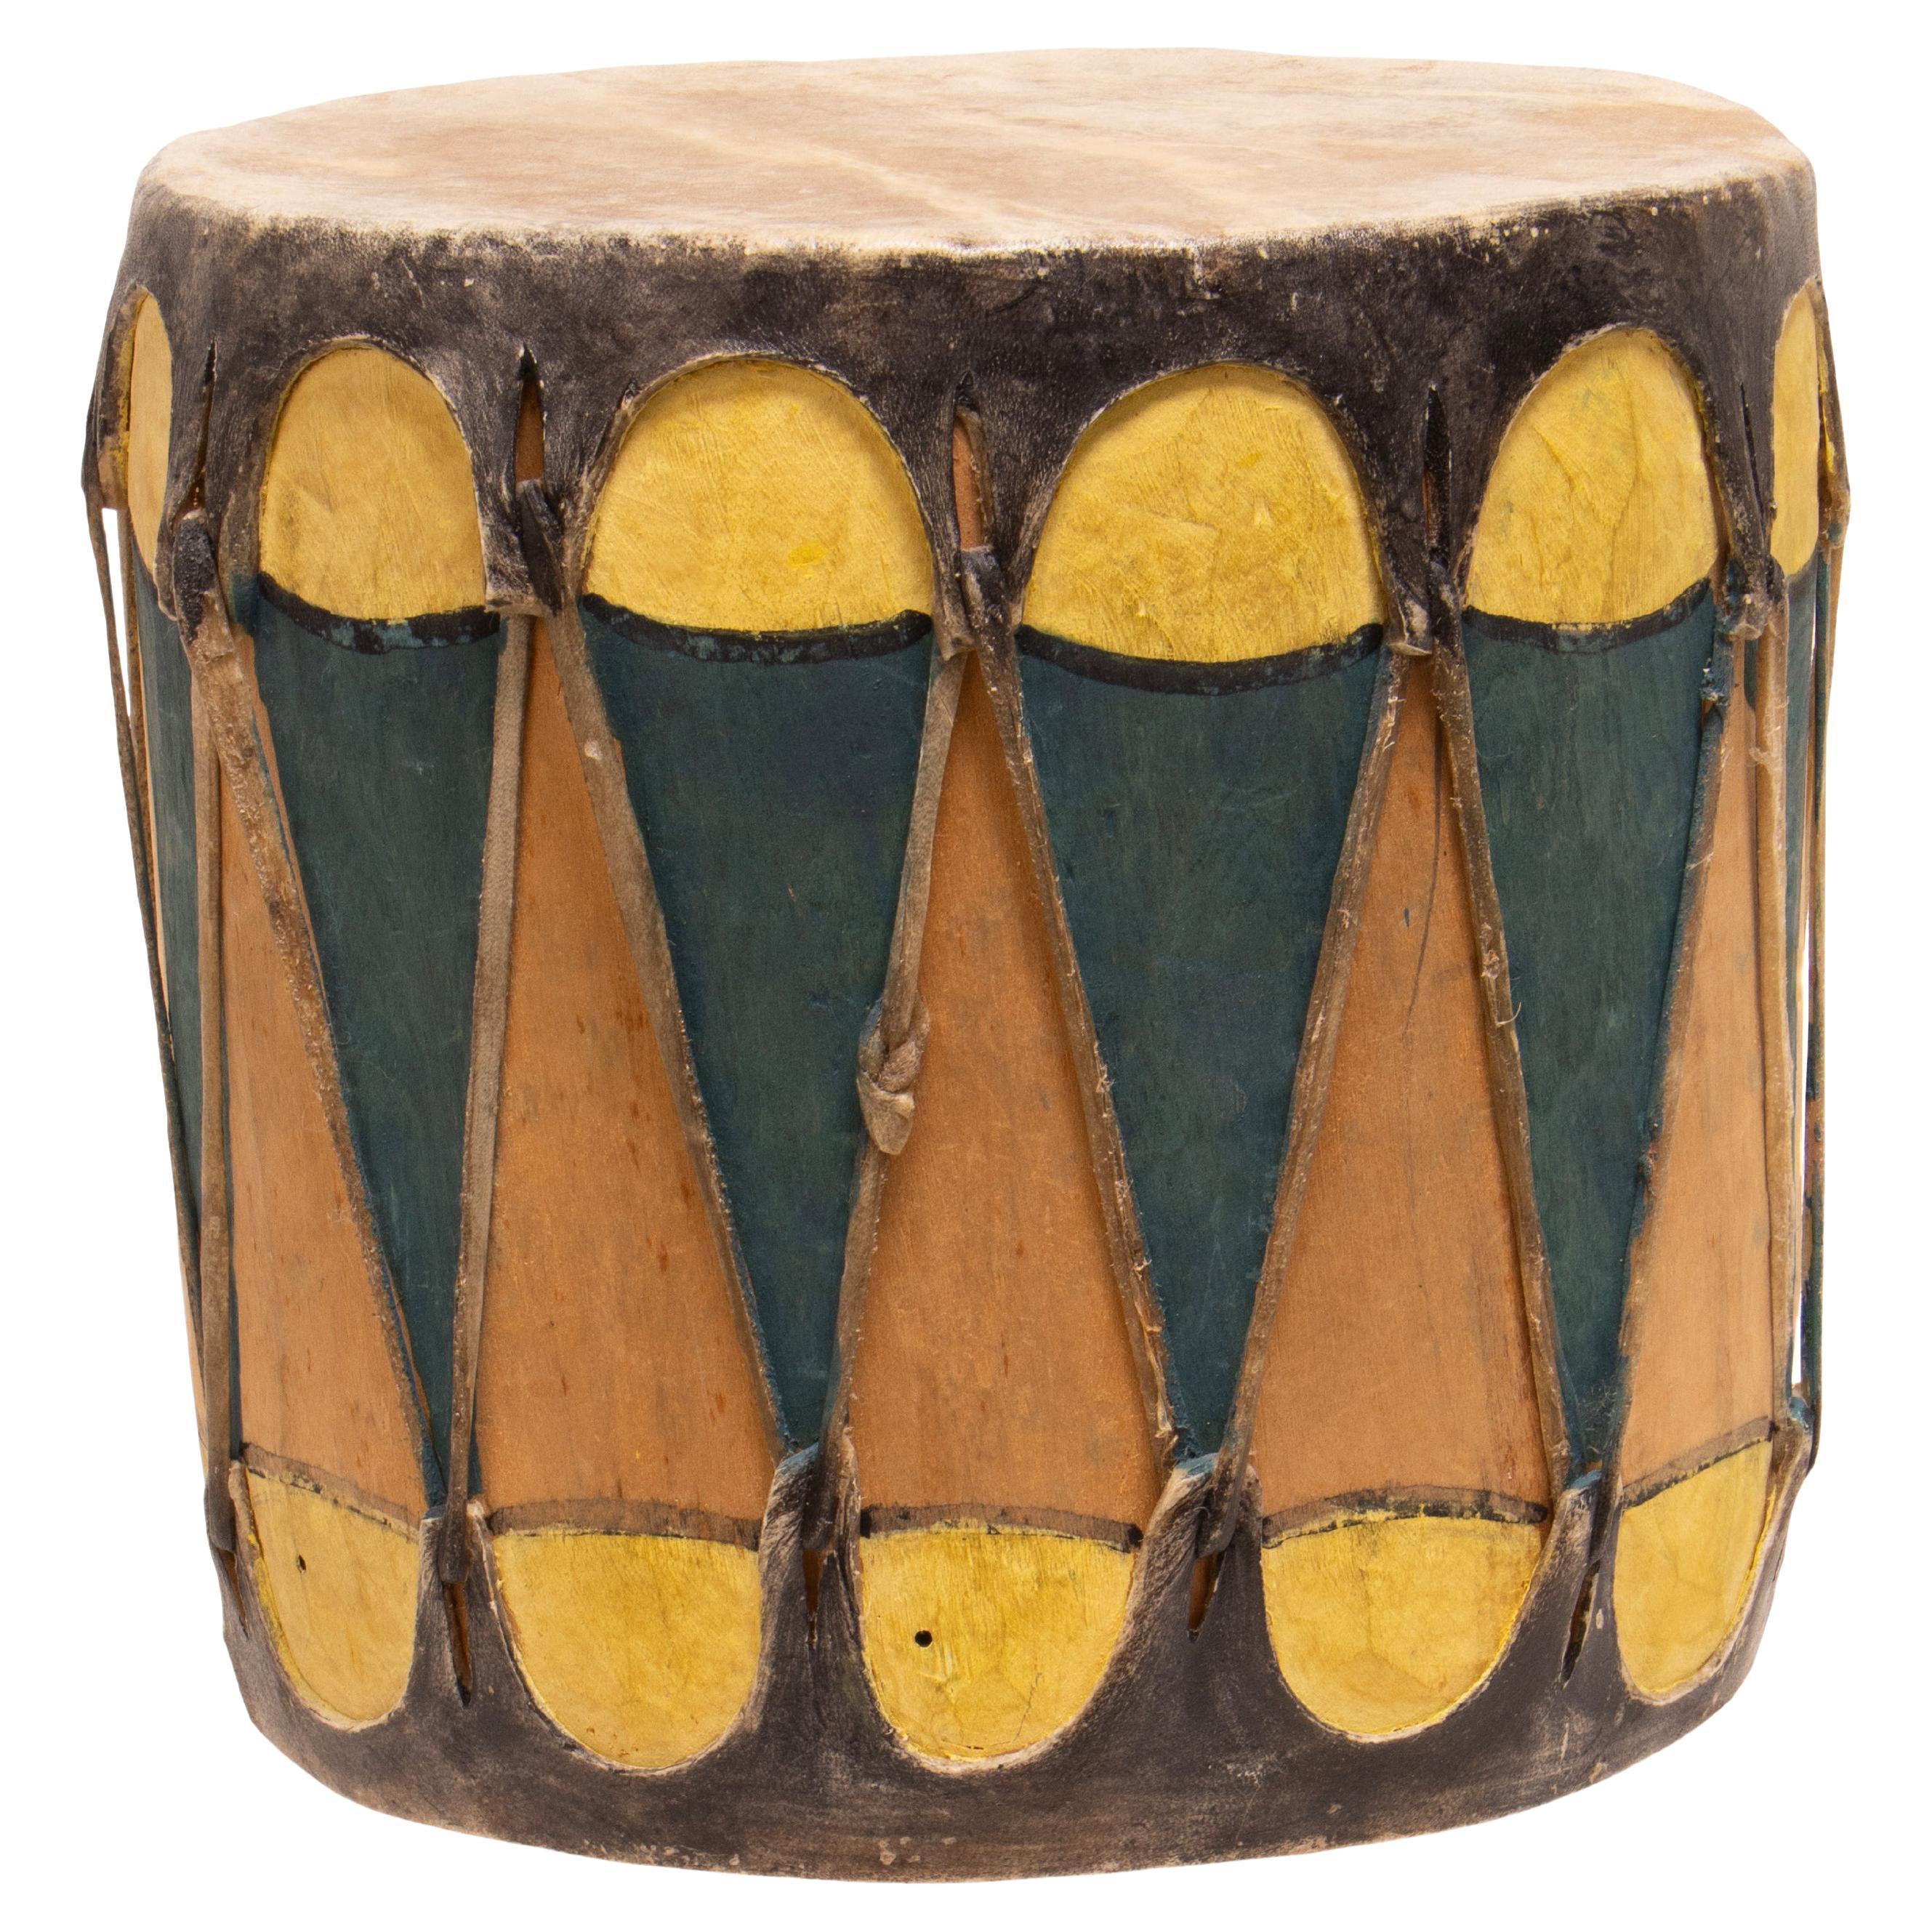 What are Native American drums called?